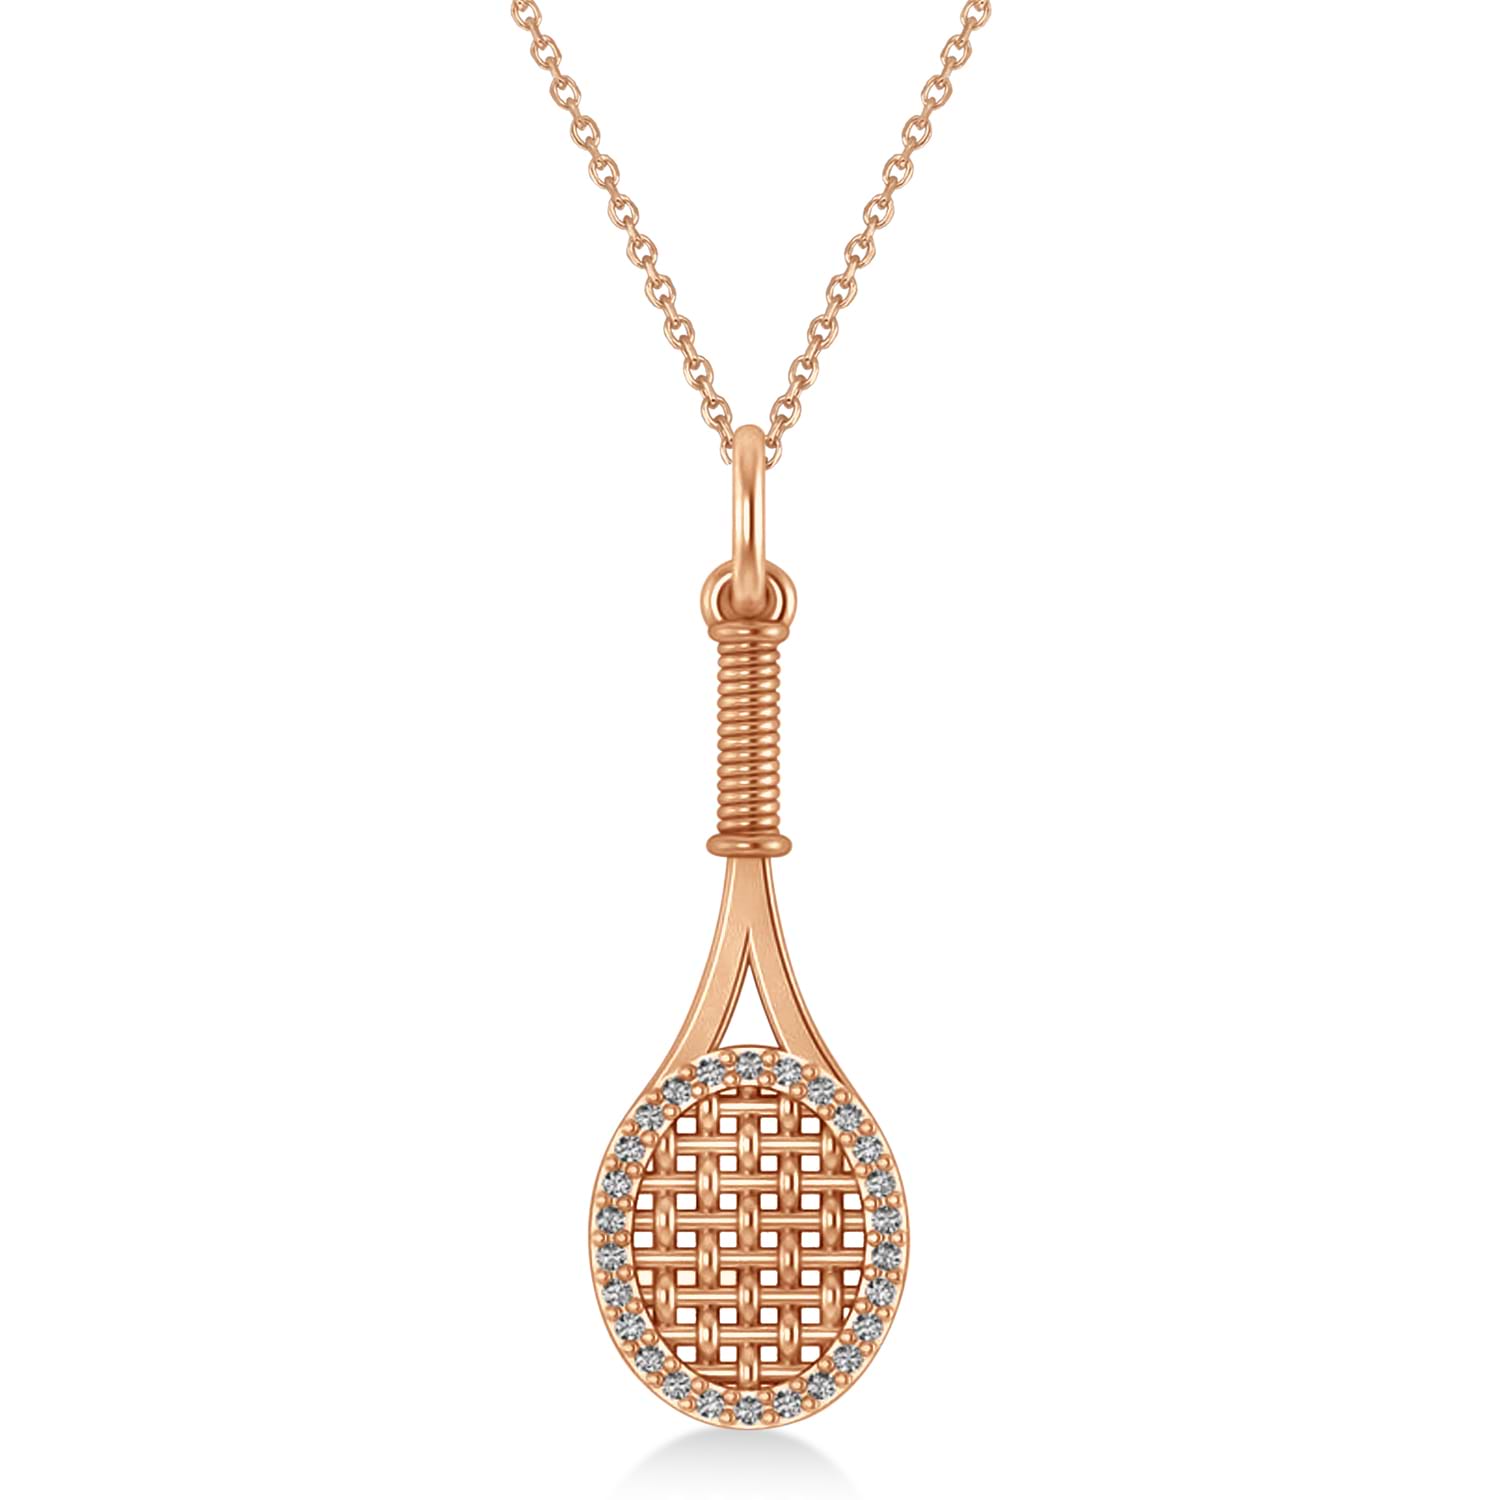 Diamond Accented Tennis Racket Pendant Necklace 14K Rose Gold (0.48ct)